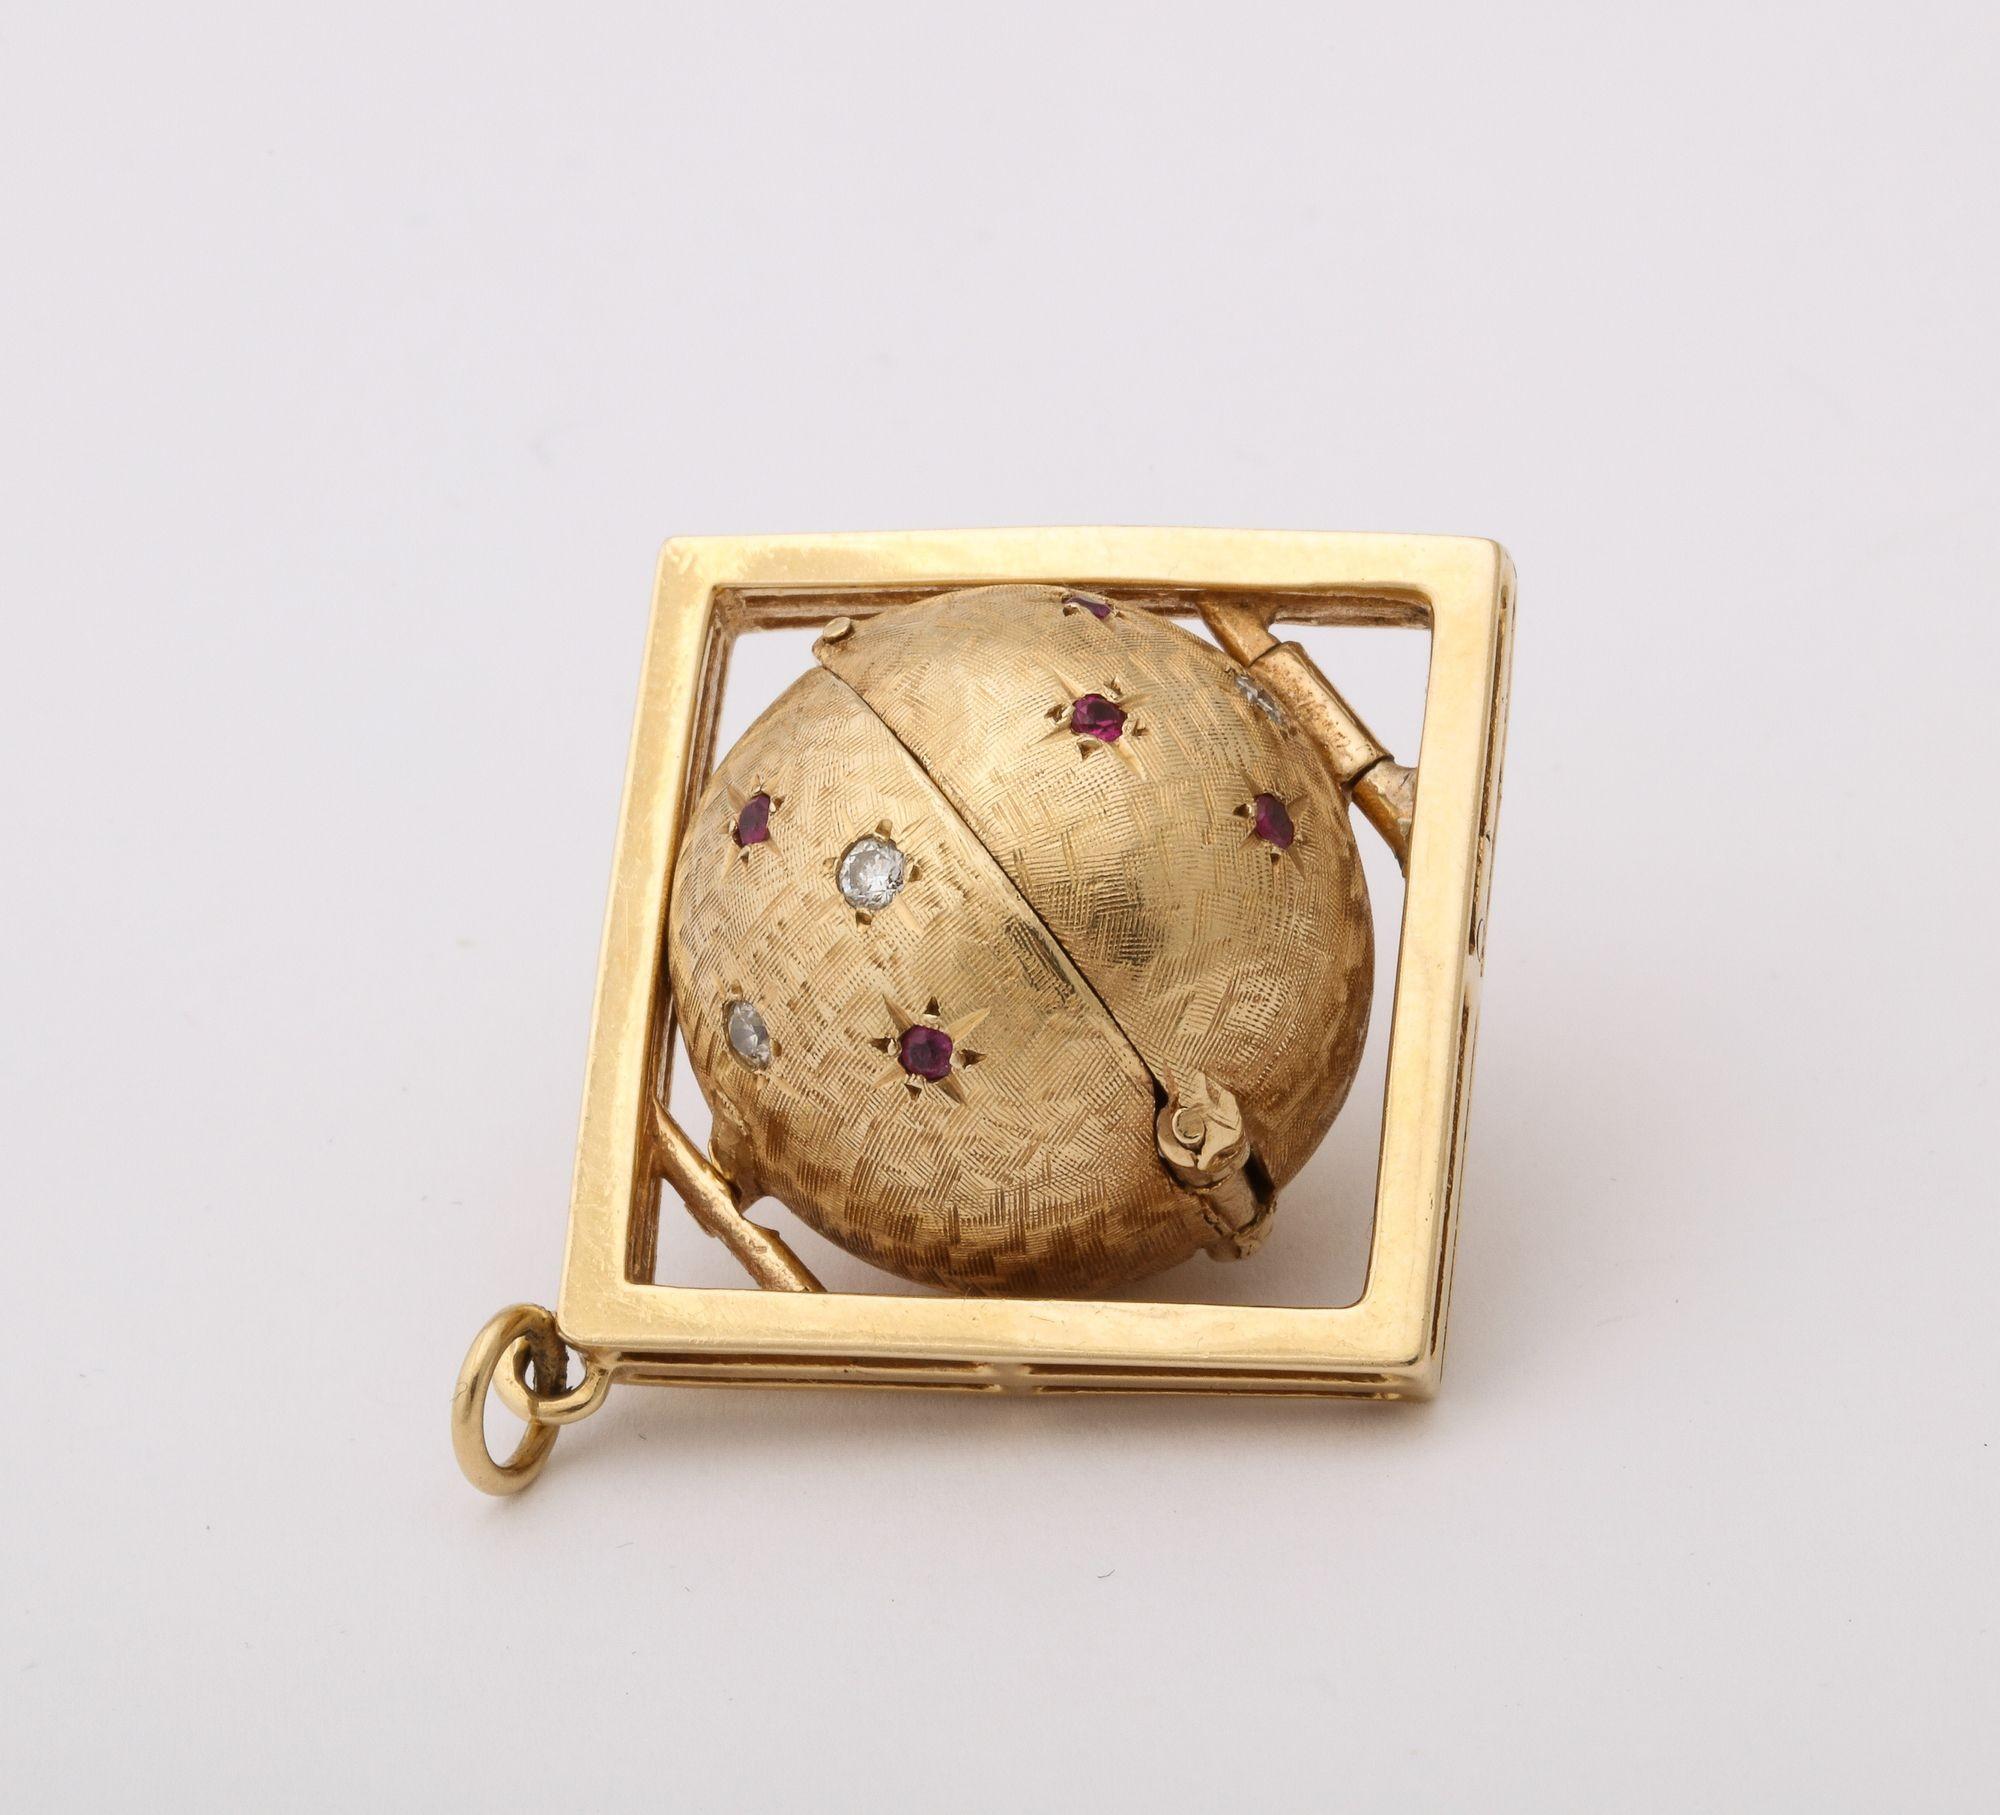 A 14 k Gold Sphere Hinged Locket with Rubies and Diamonds in a gold frame.
The globe opens to reveal 3 chambers for photographs. 1.5” diameter